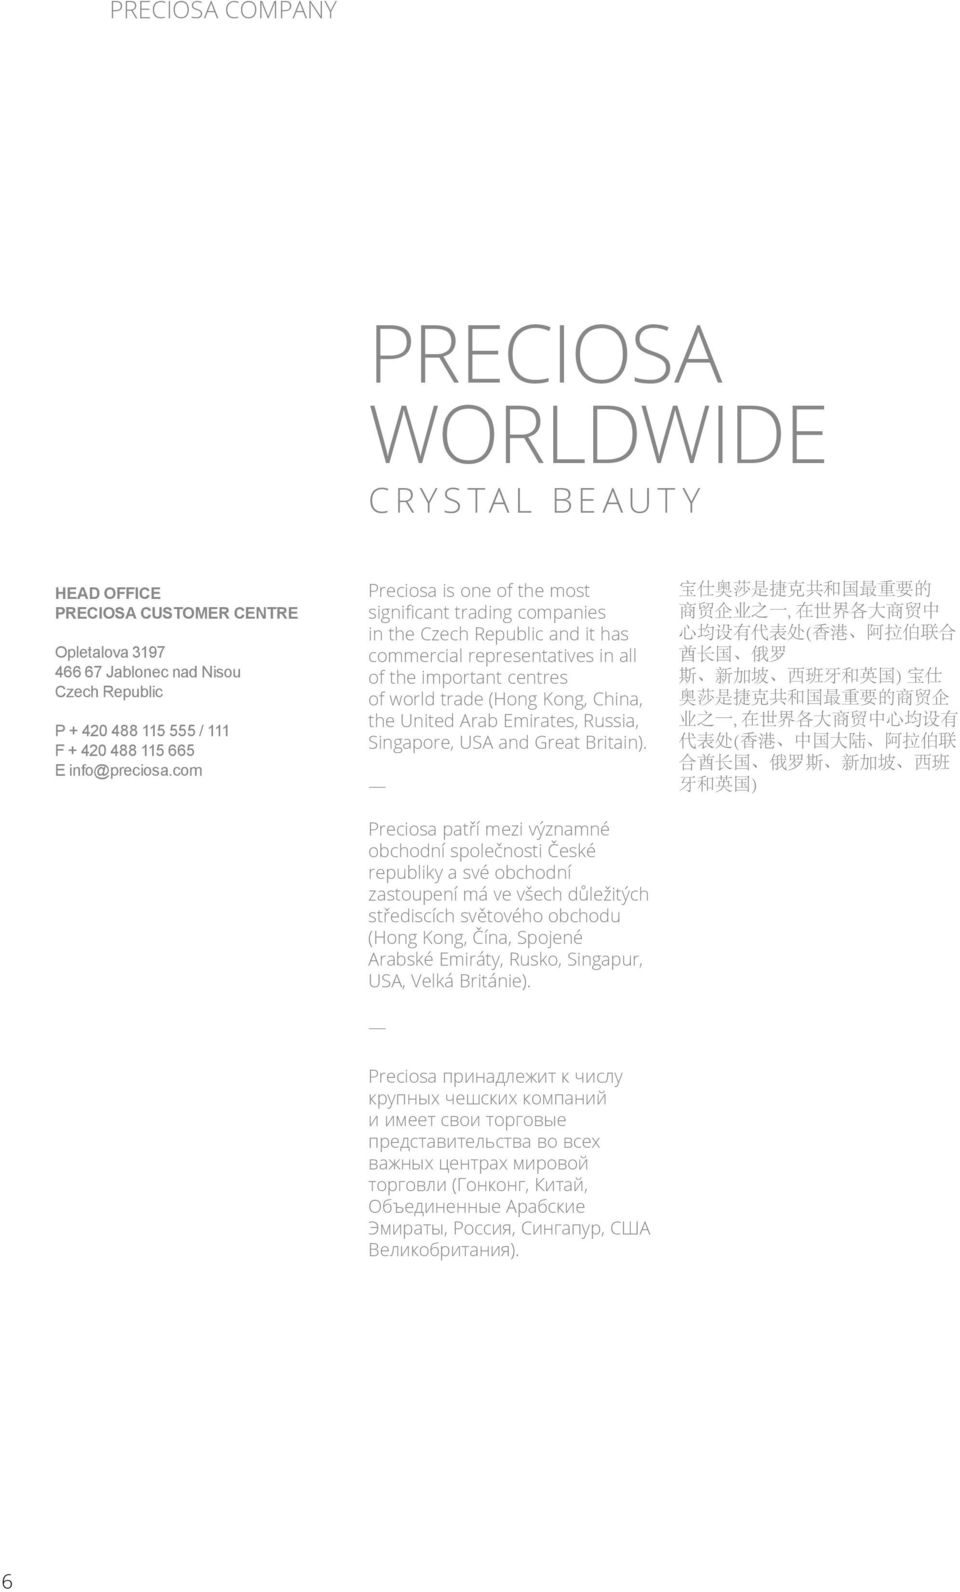 com Preciosa is one of the most significant trading companies in the Czech Republic and it has commercial representatives in all of the important centres of world trade (Hong Kong, China, the United